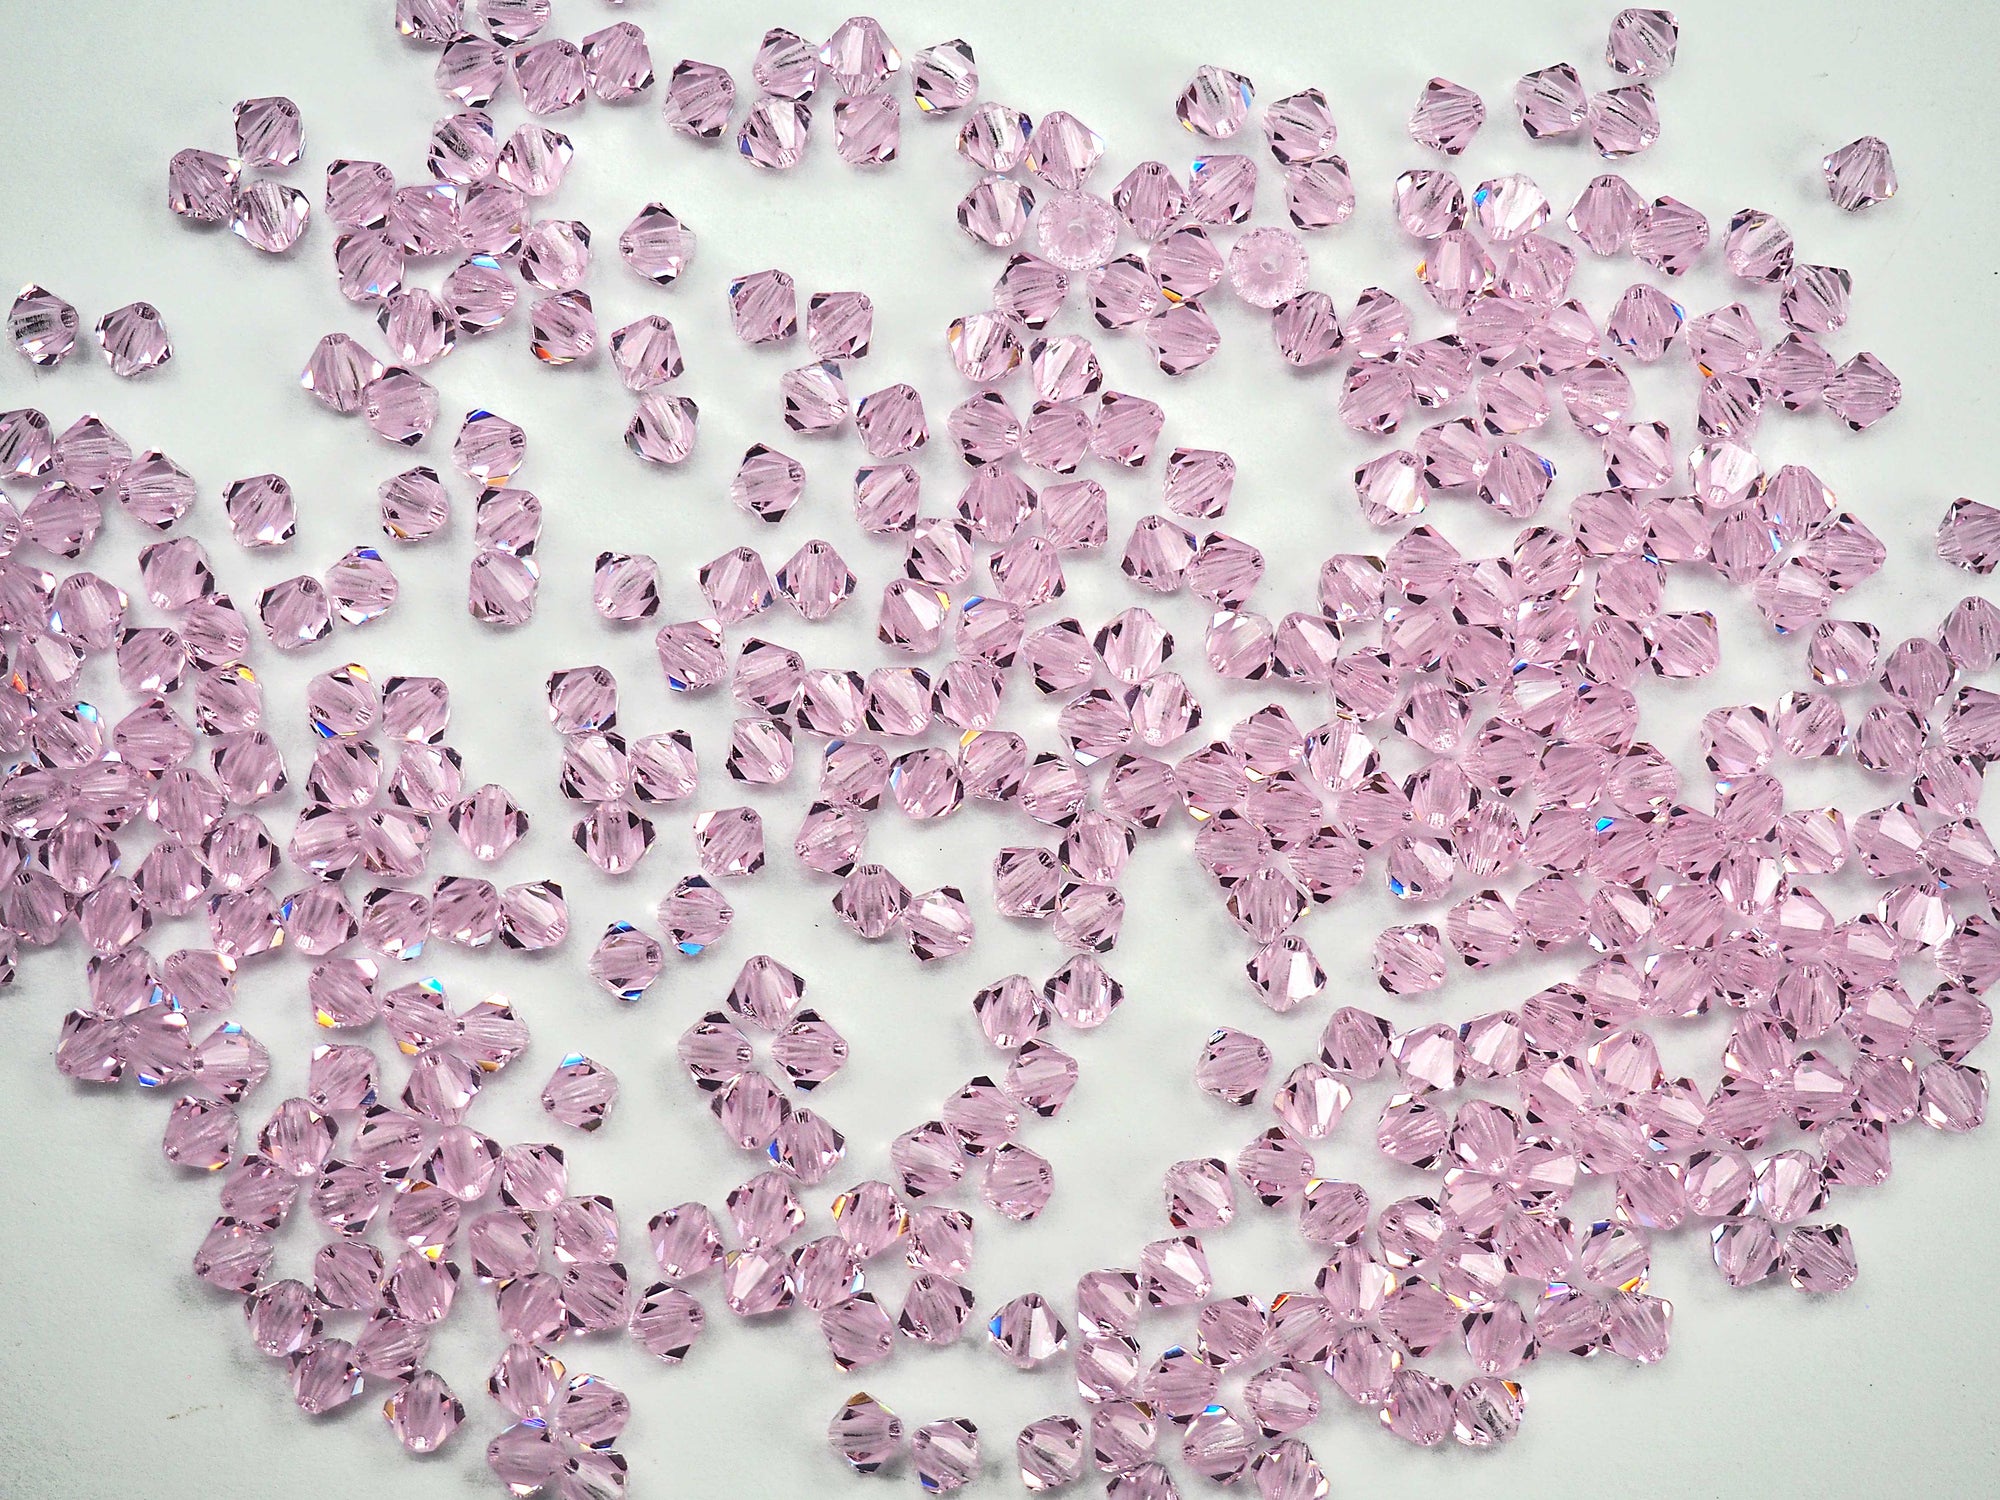 Pink Sapphire (Preciosa color), Czech Glass Beads, Machine Cut Bicones -  Crystals and Beads for Friends